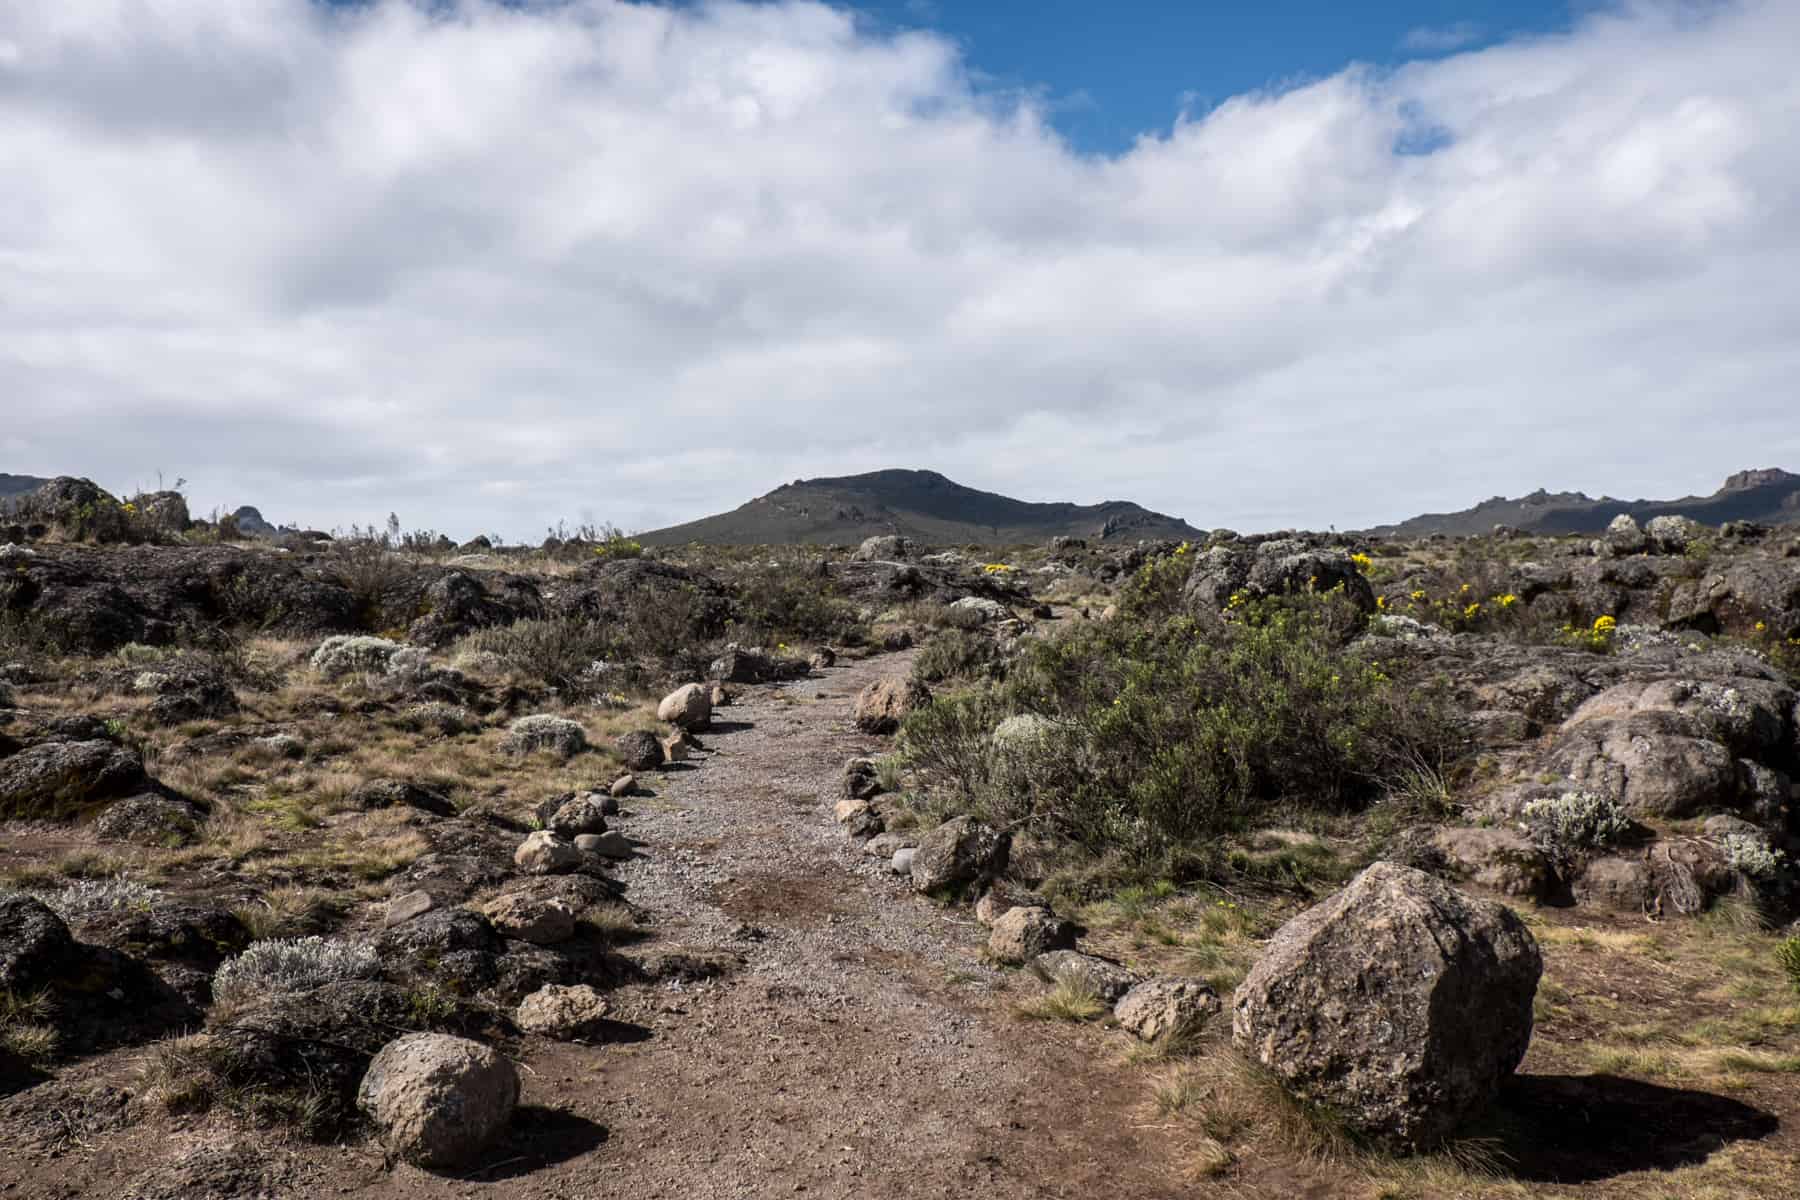 A flattened path mark by a boundary of small rocks through a dry-grassy, rock strewn mountain landscape.